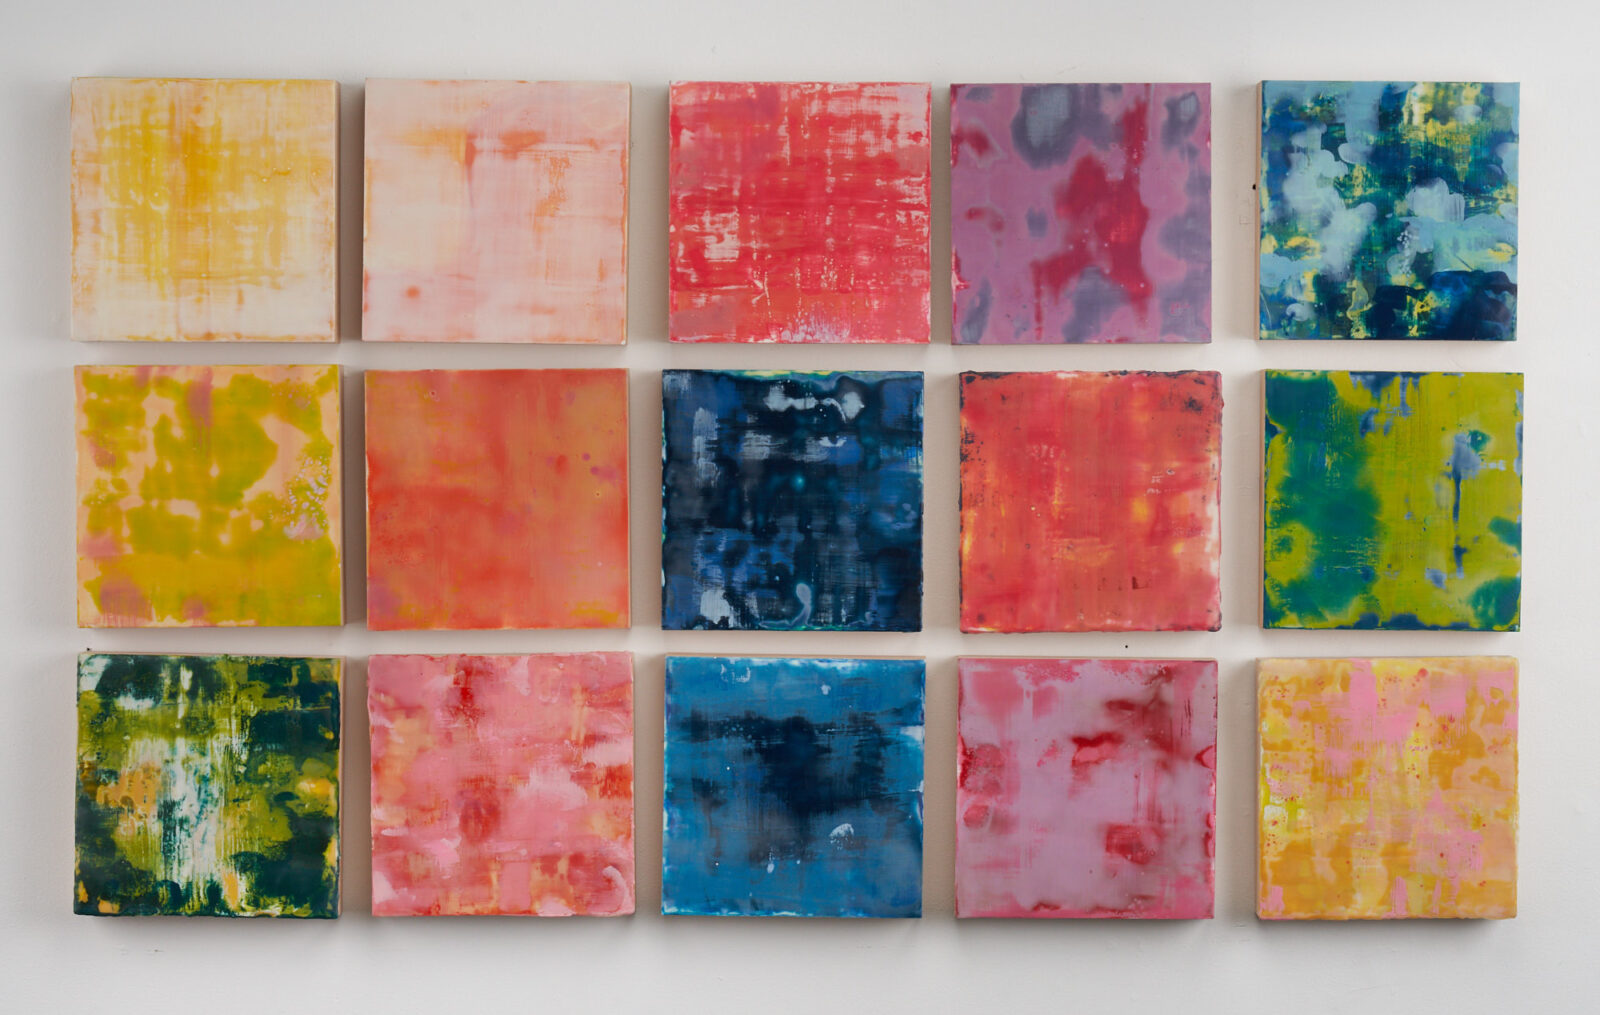 Emily Mann, Ink and Indigo, Overtone Series | encaustic on panel, 12" x 12" each